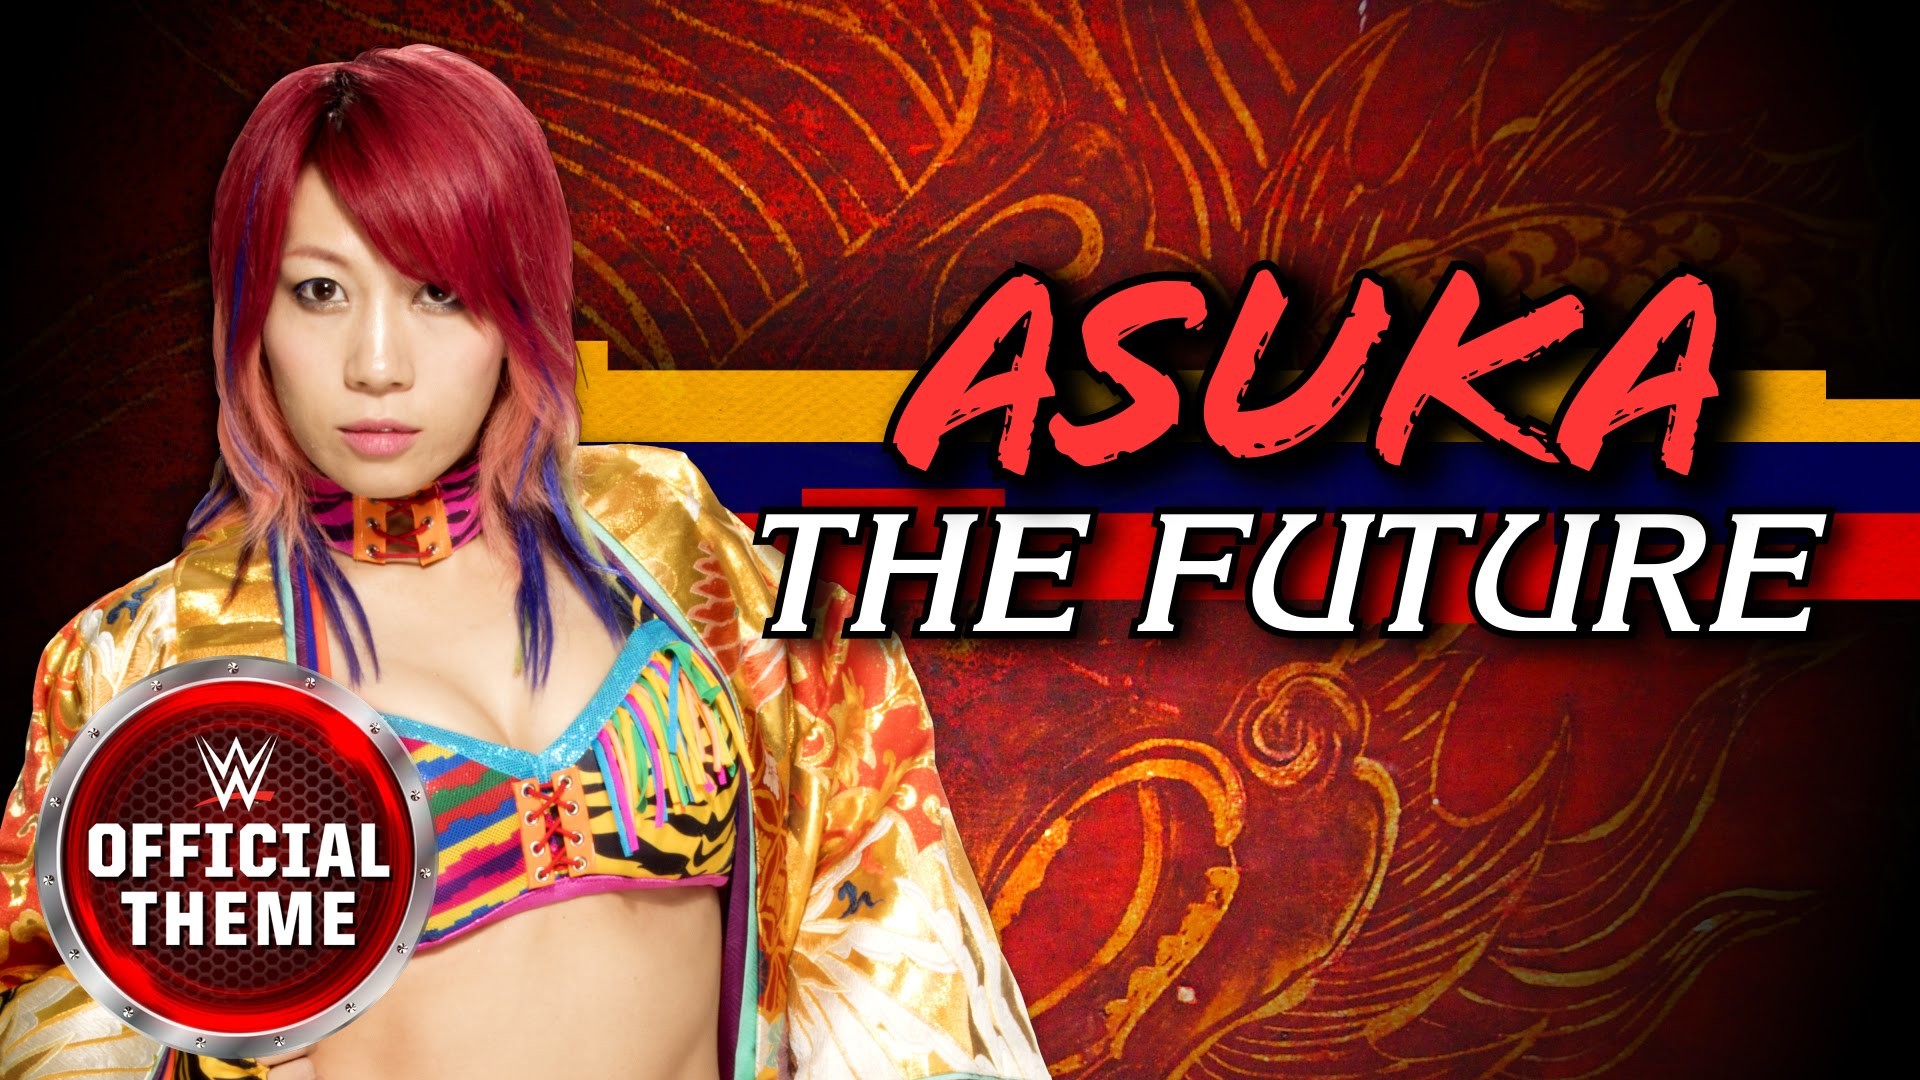 1920x1080 ... 2015: Asuka 2nd & New WWE Theme Song - "The Future" ...